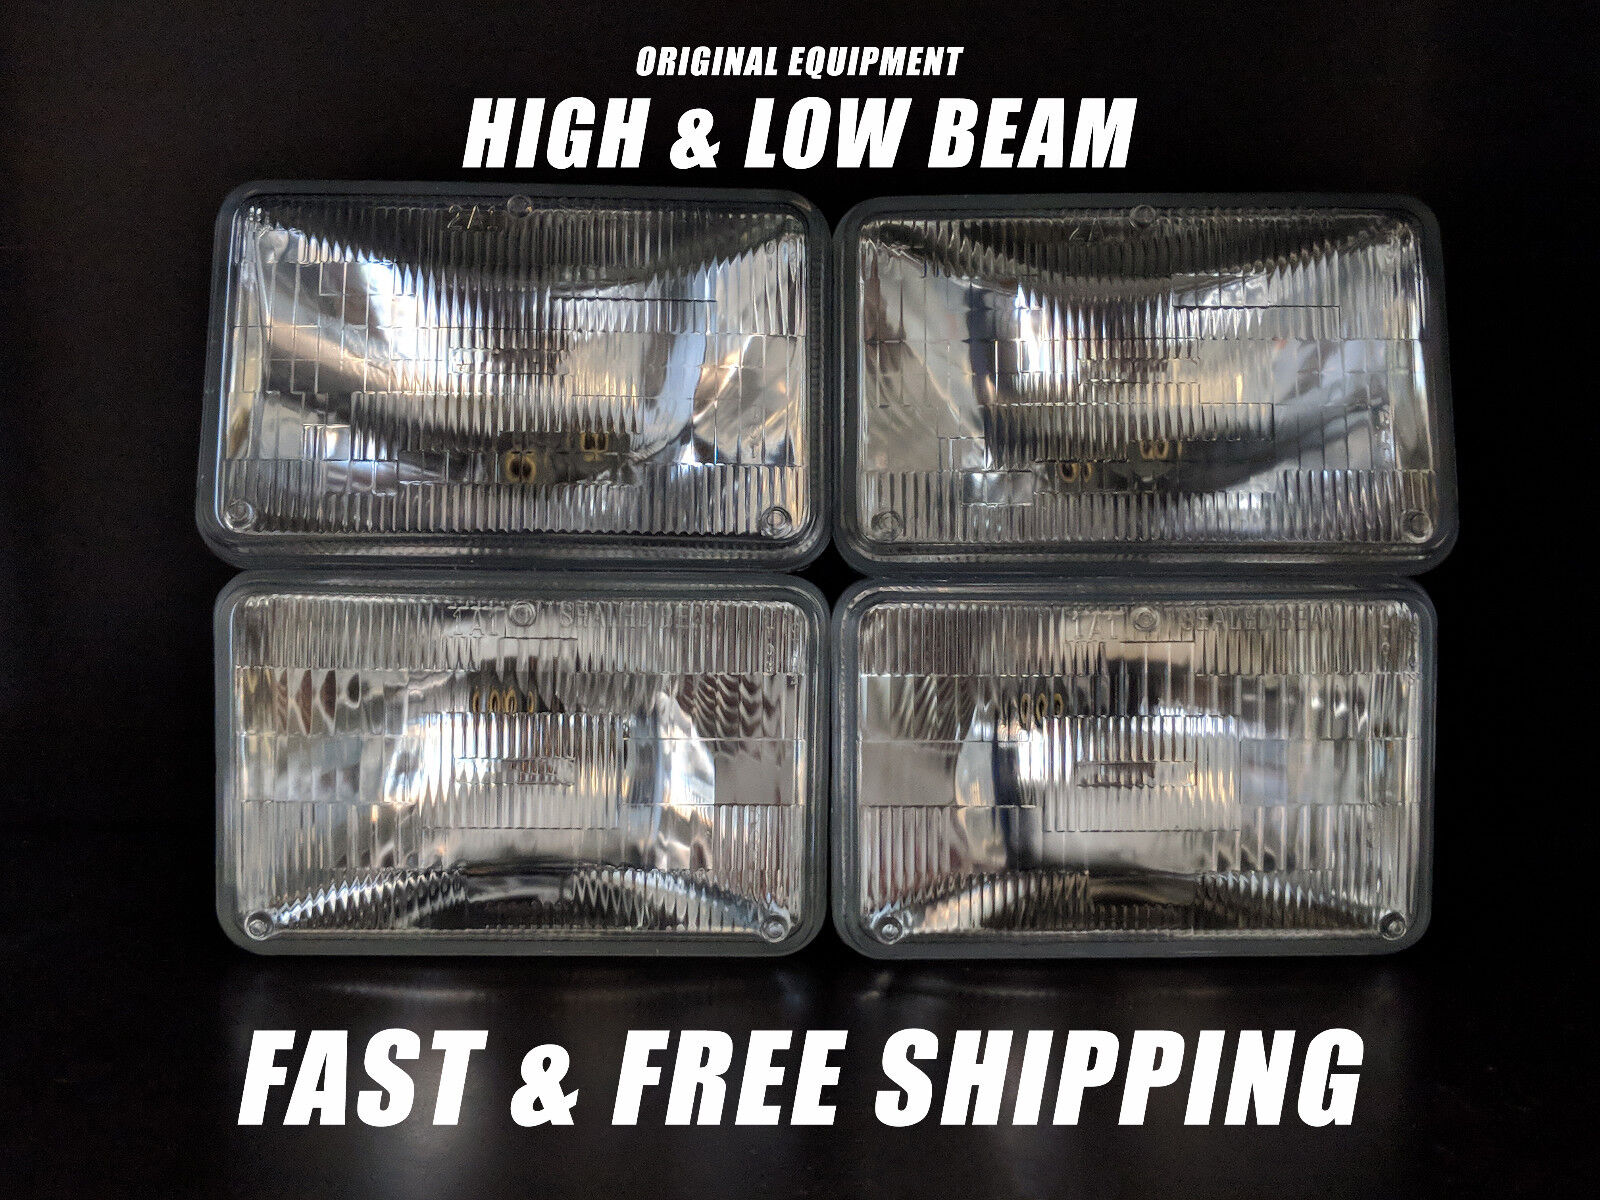 OE Front Halogen Headlight Bulb for Dodge Rampage 1984 High Low Beam x4